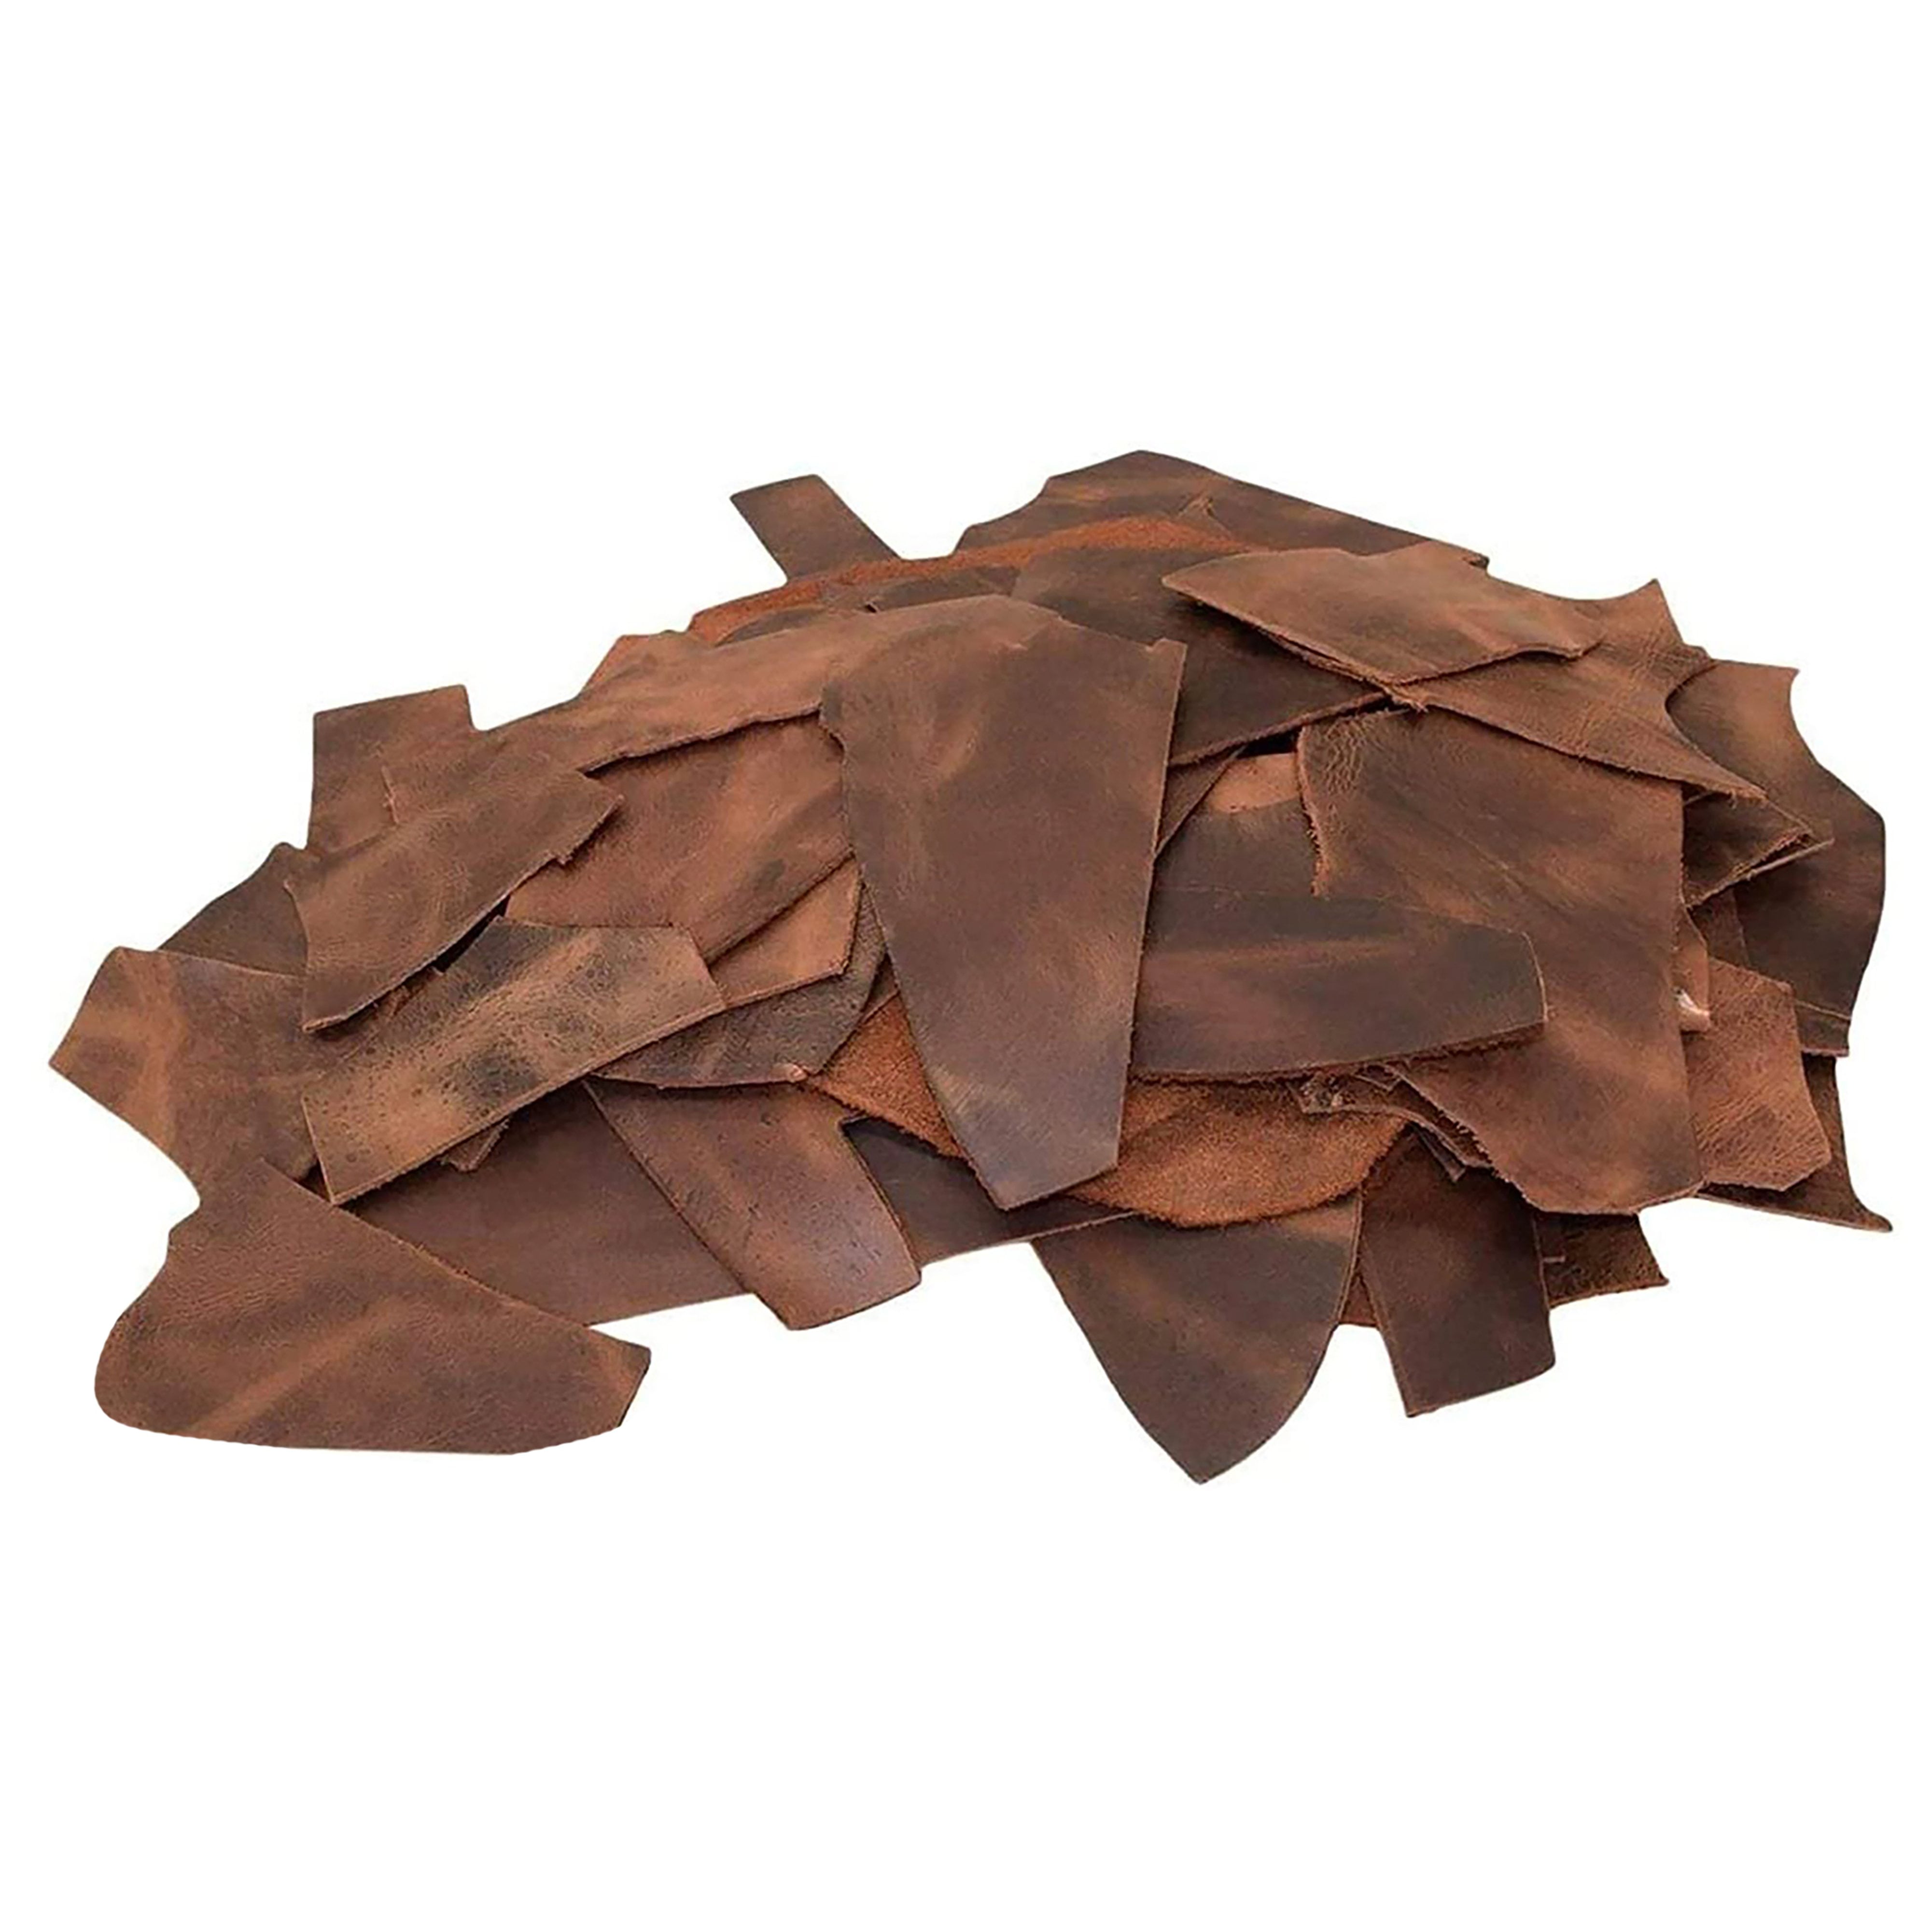 Upon Leather - Embossed and Printed Leather Scraps 1 Pound Medium & Large Pieces | 6-7 Square Feet Cowhide Remnants for Crafts, Earrings, Jewelry | Mo